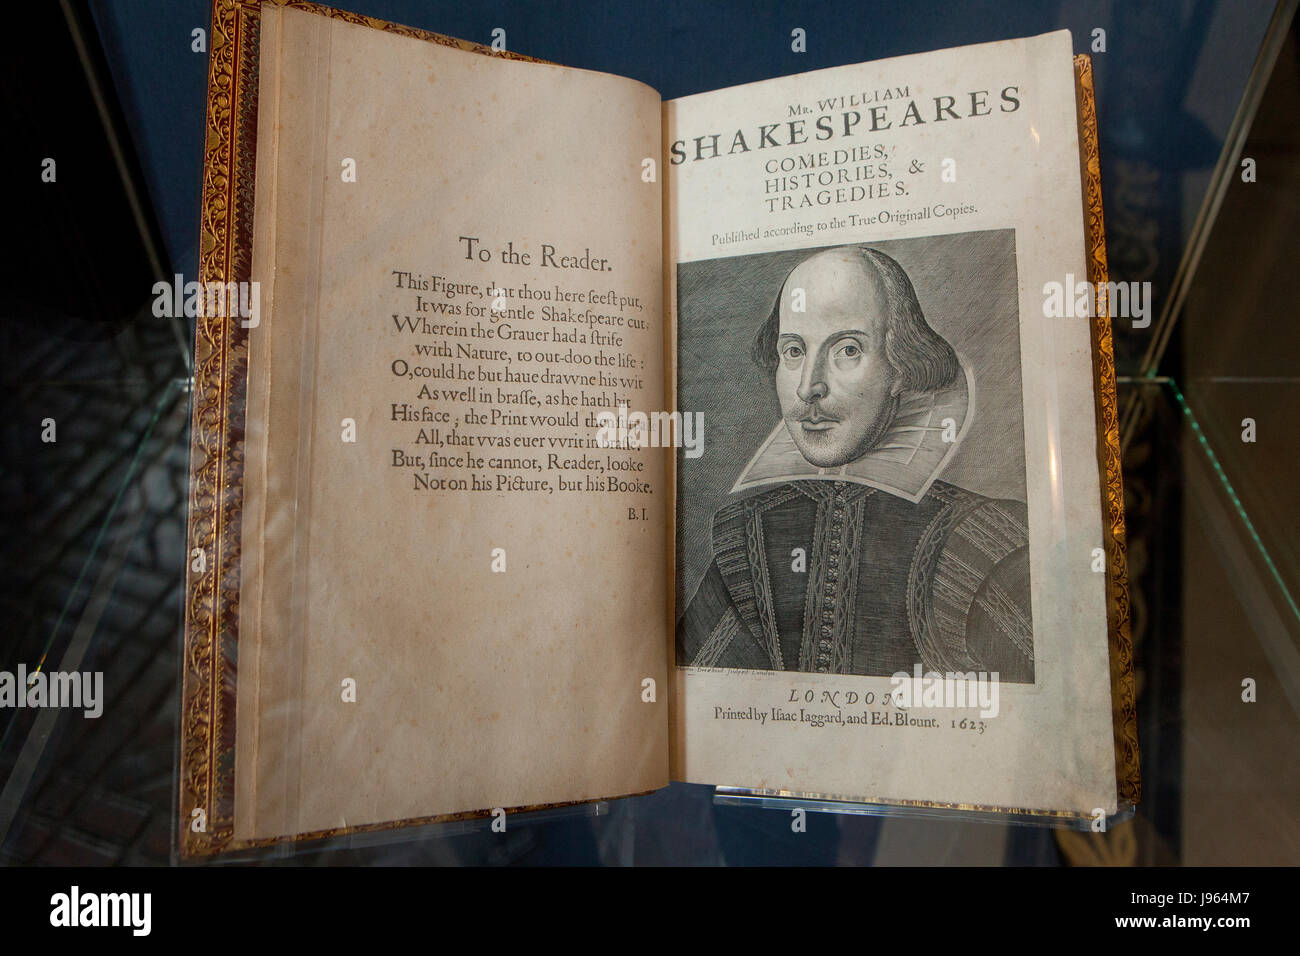 First Folio copy of Comedies, Histories, & Tragedies manuscript on display at The Folger Shakespeare Library in Washington DC Stock Photo